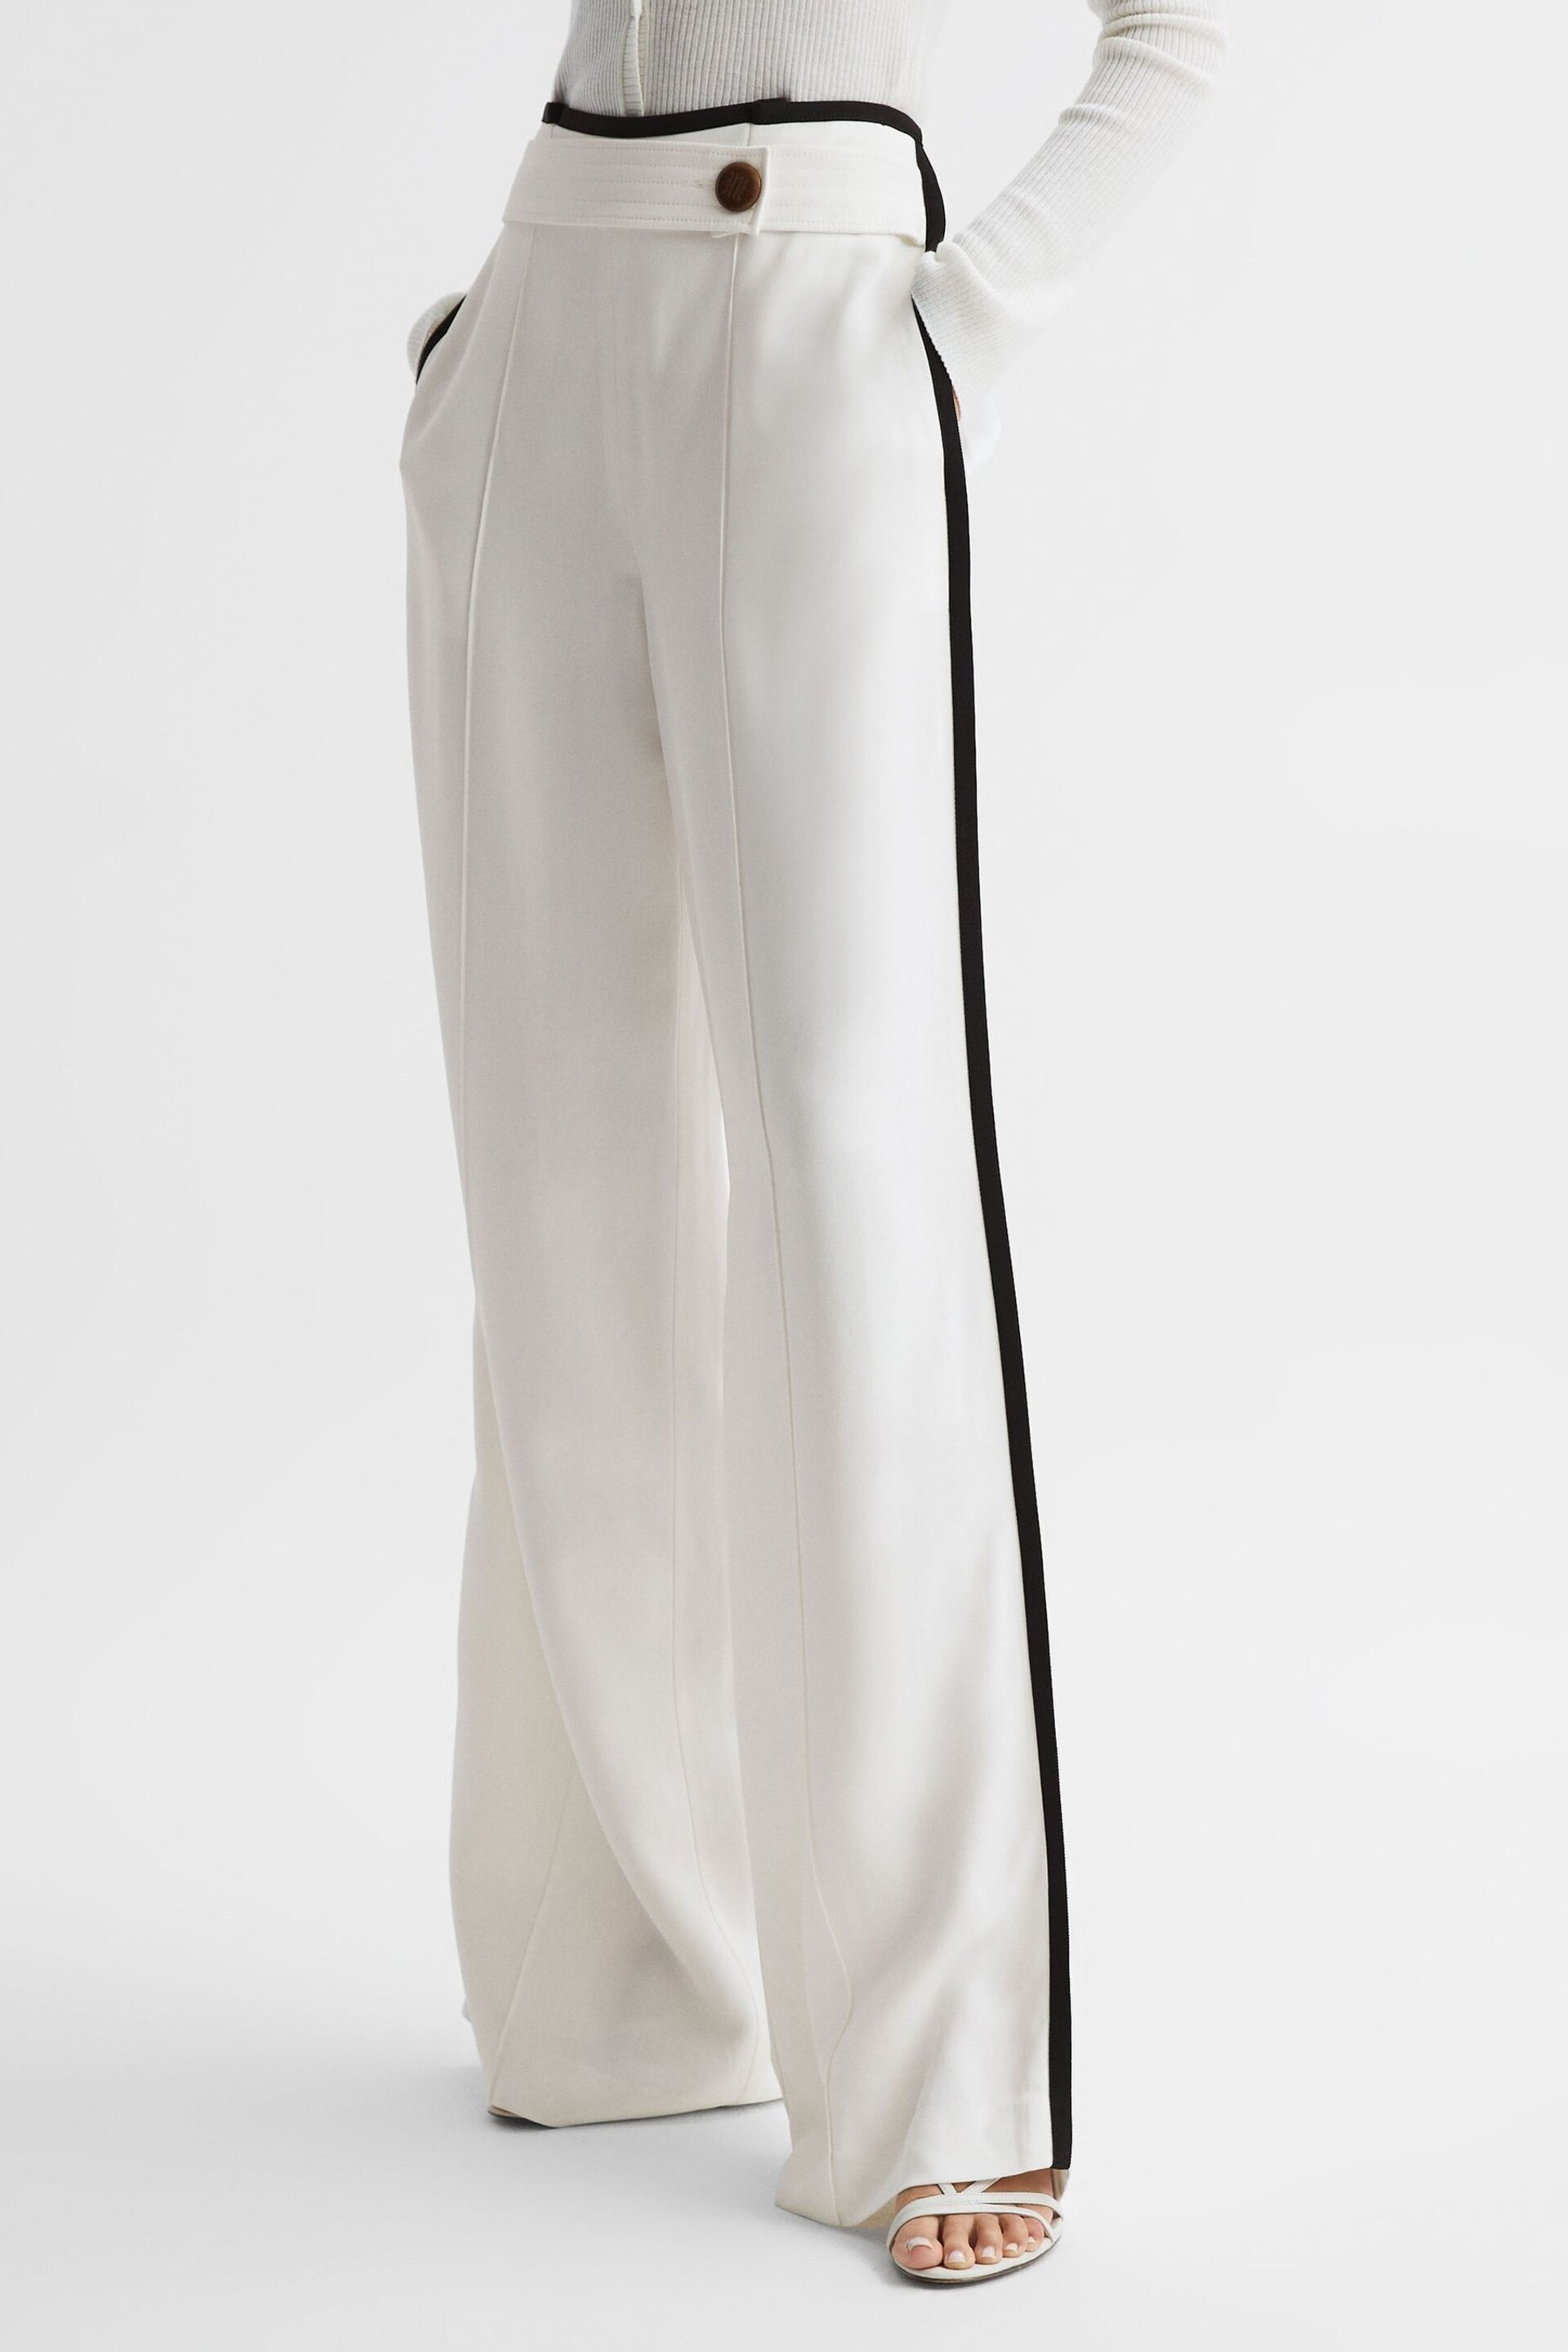 Reiss Cream Lina High Rise Wide Leg Trousers - Image 3 of 6